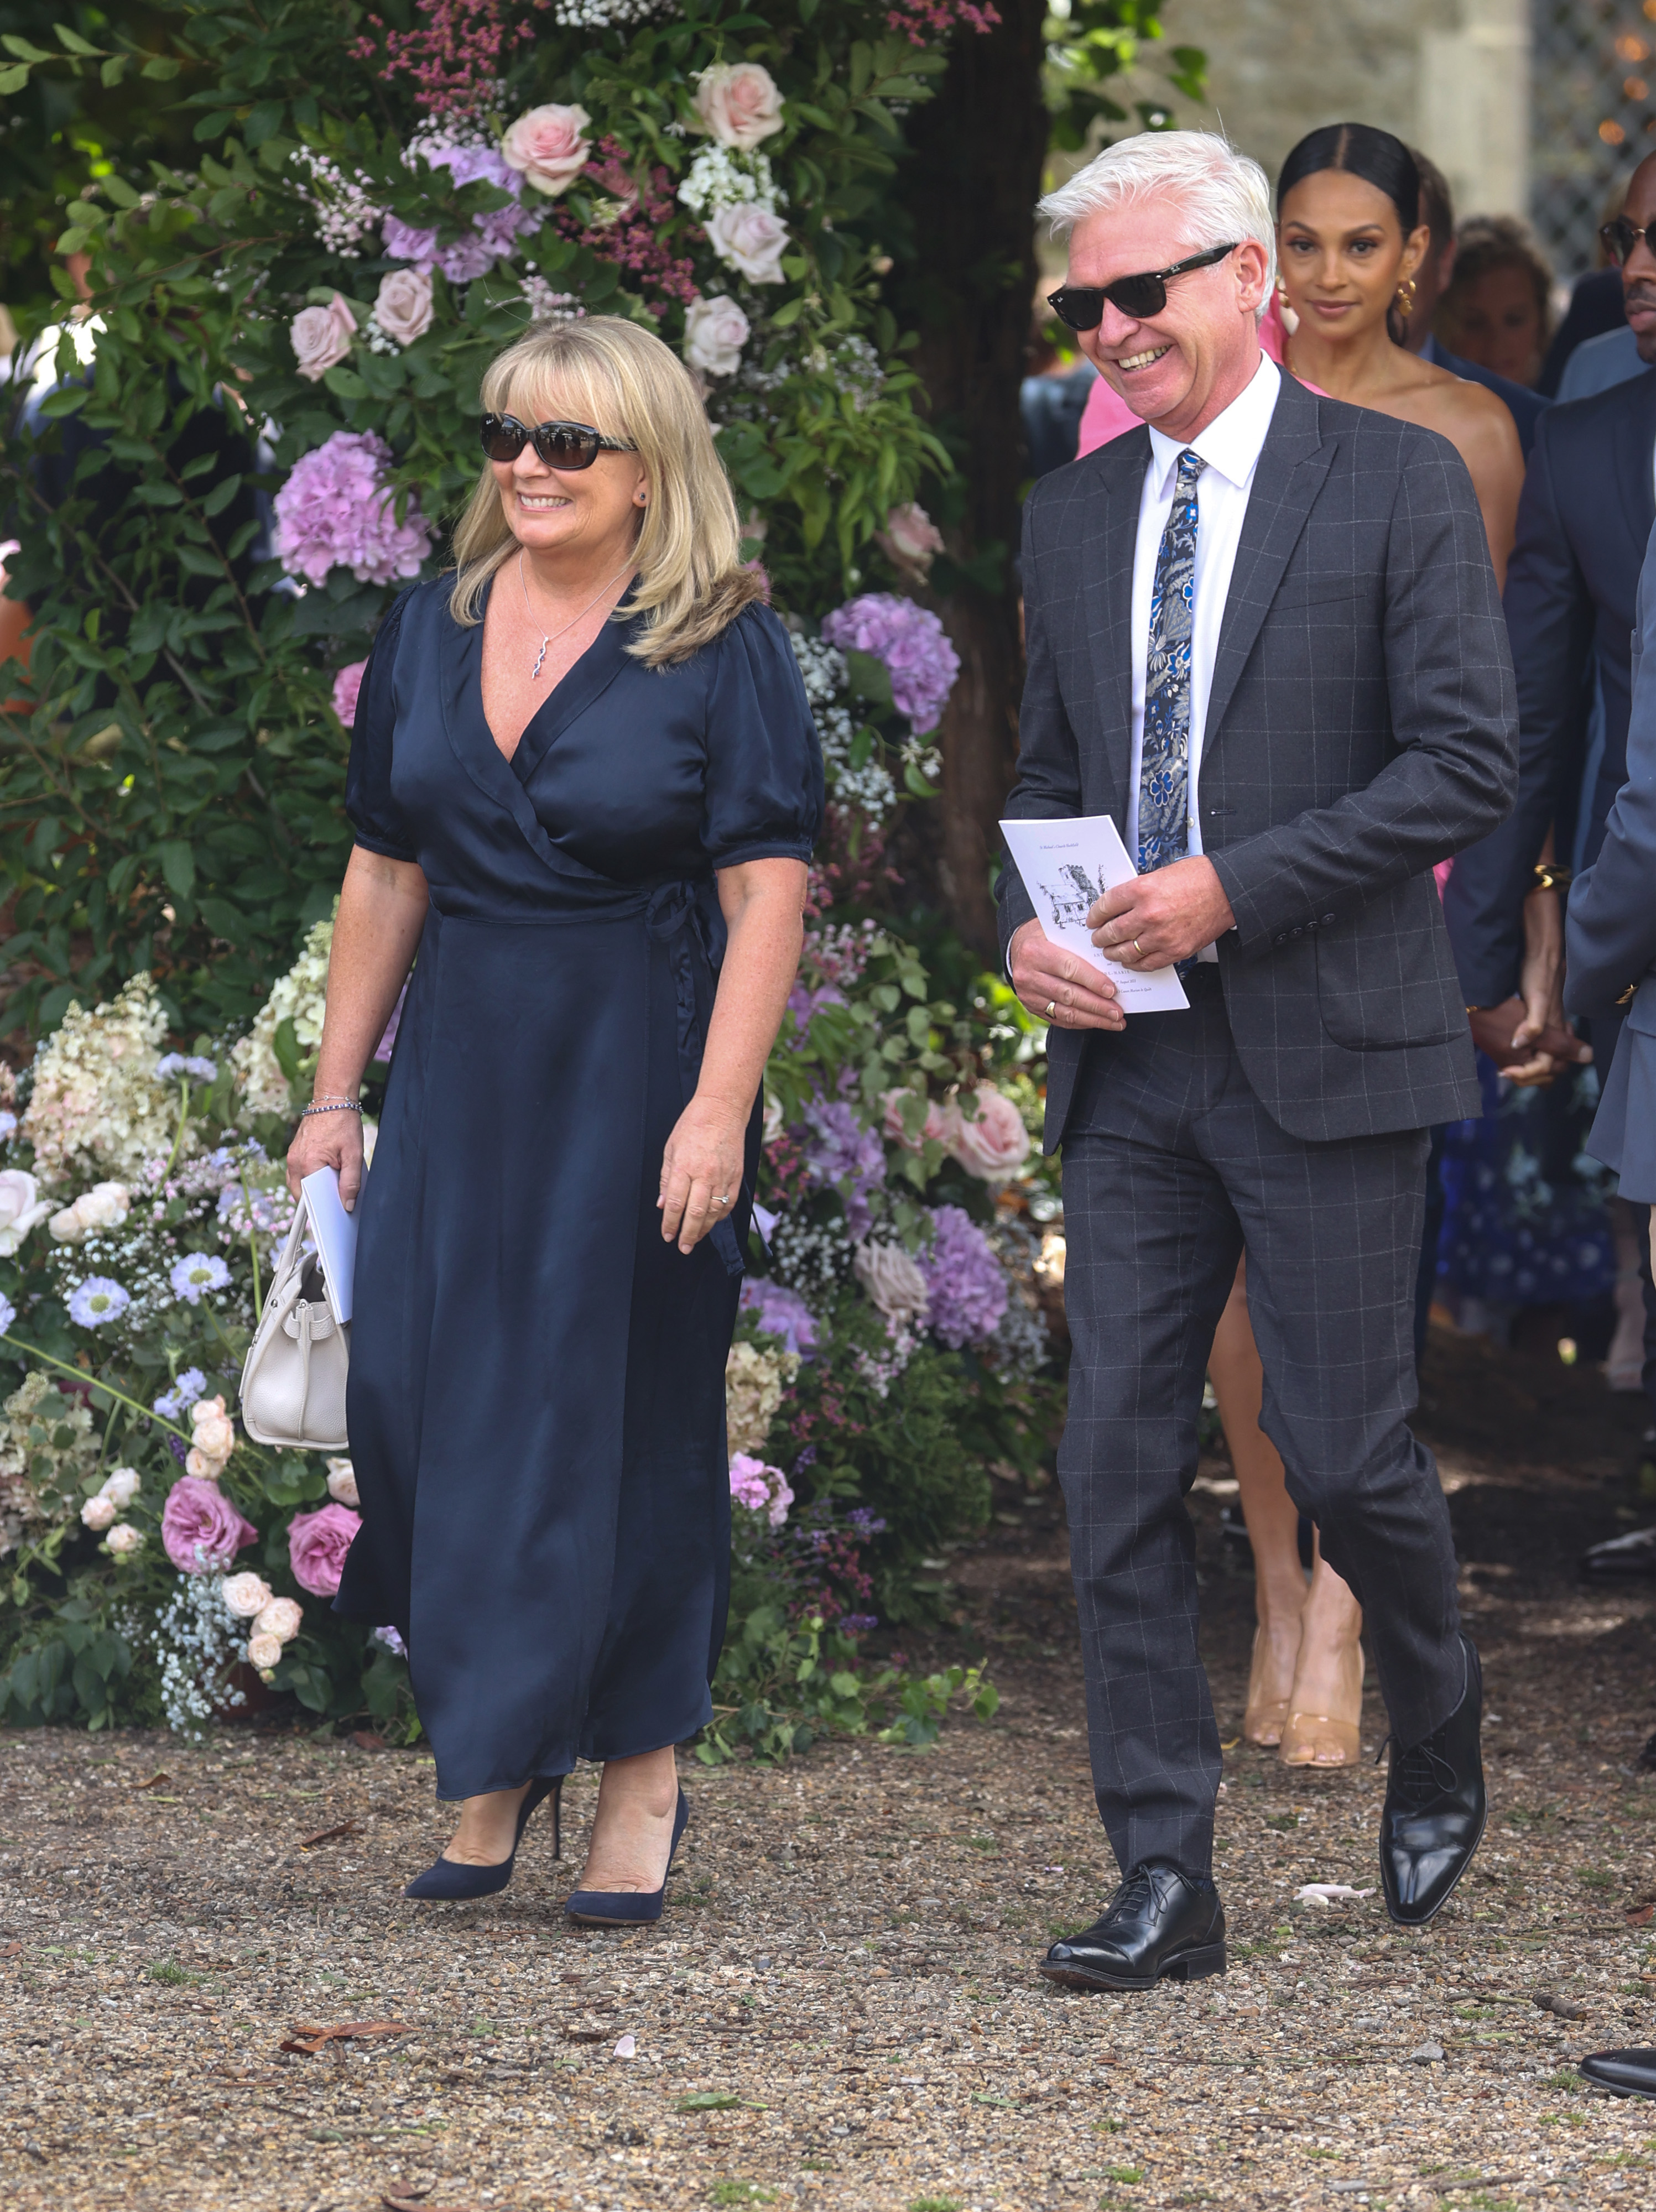 Phillip Schofield and Stephanie Lowe seen departing the wedding of Ant McPartlin and Anne-Marie Corbett on August 7, 2021, in Hook, Hampshire. | Source: Getty Images